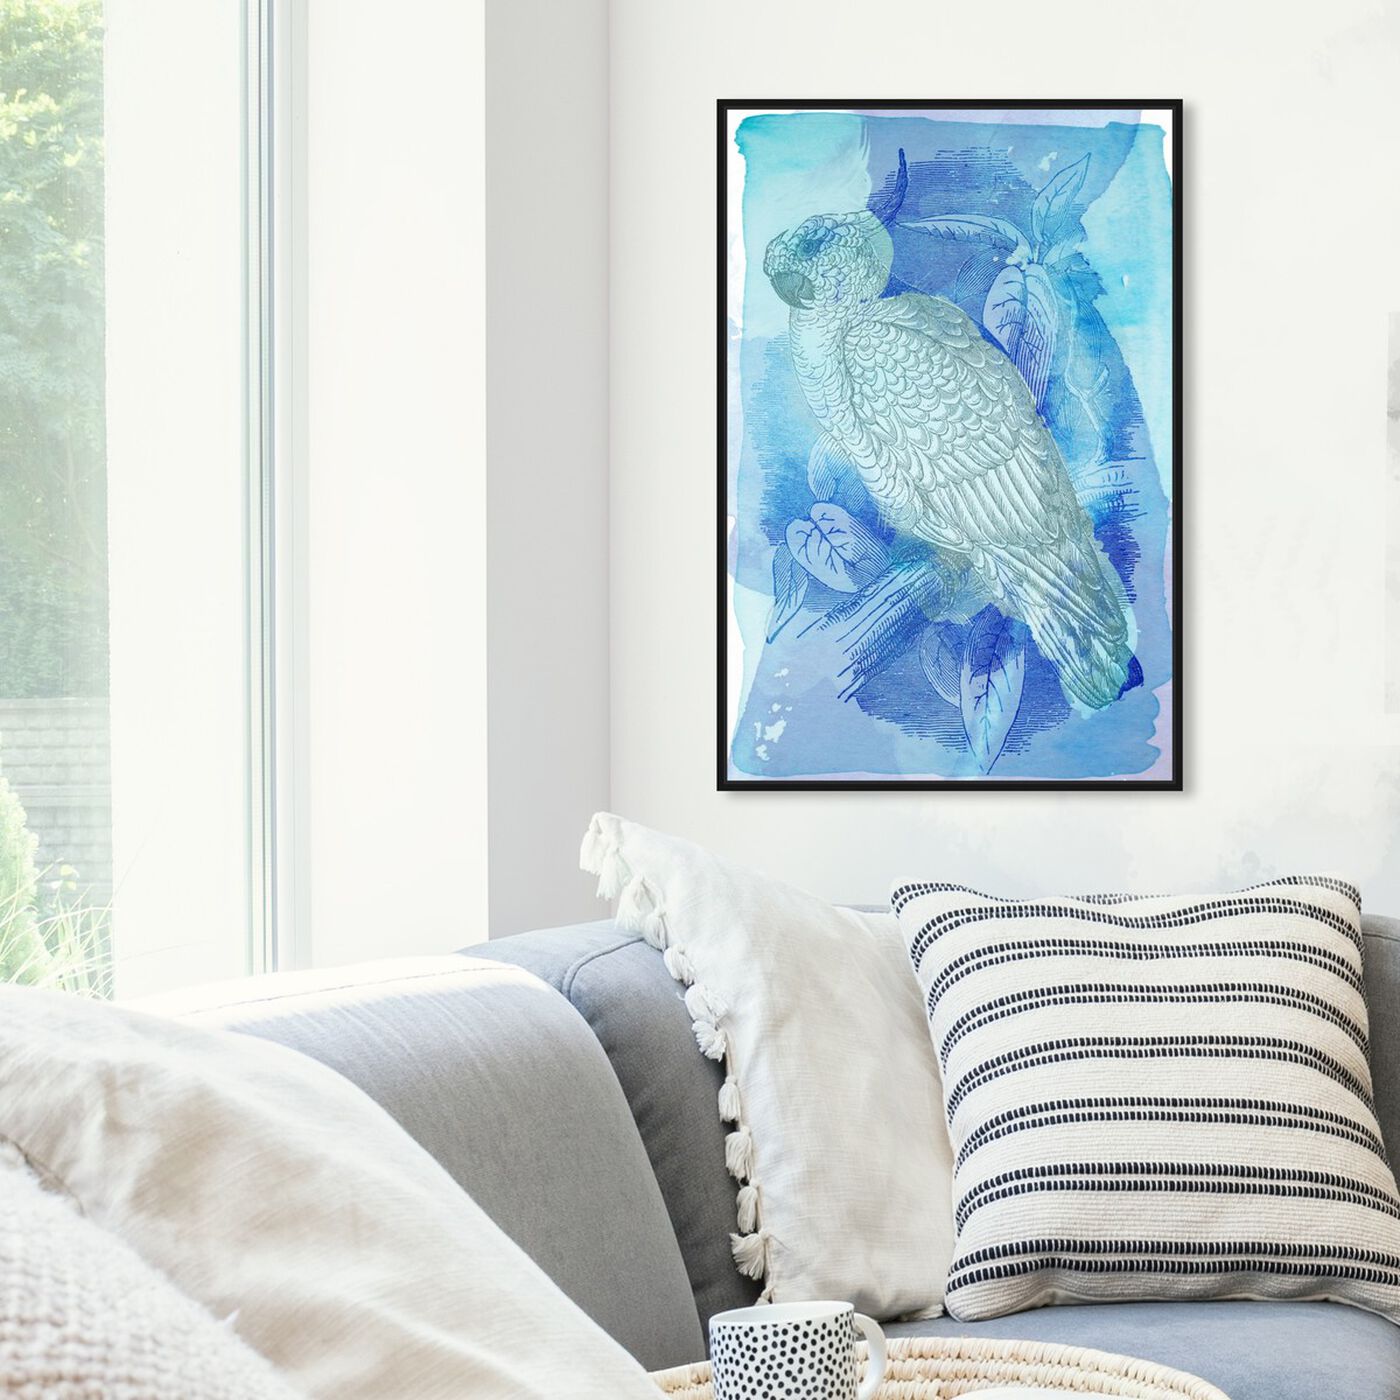 Hanging view of Fly and Fade featuring animals and birds art.